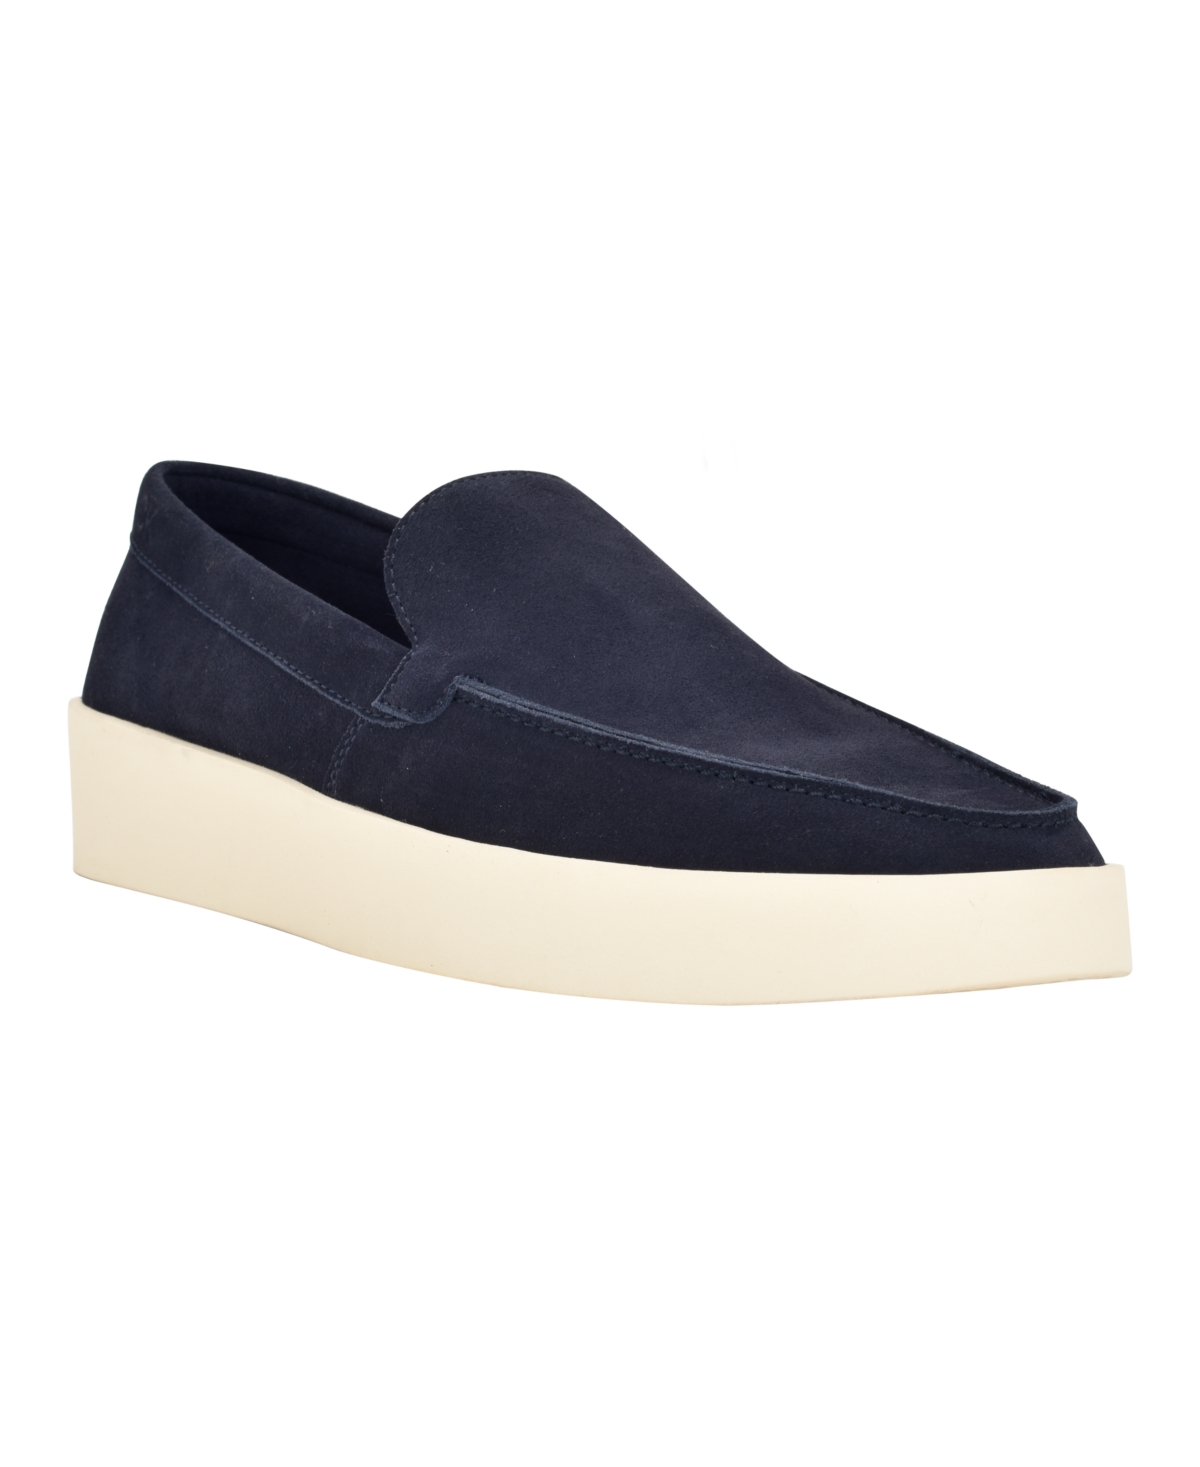 Calvin Klein Men's Carch Casual Slip-on Loafers Men's Shoes In Navy Suede